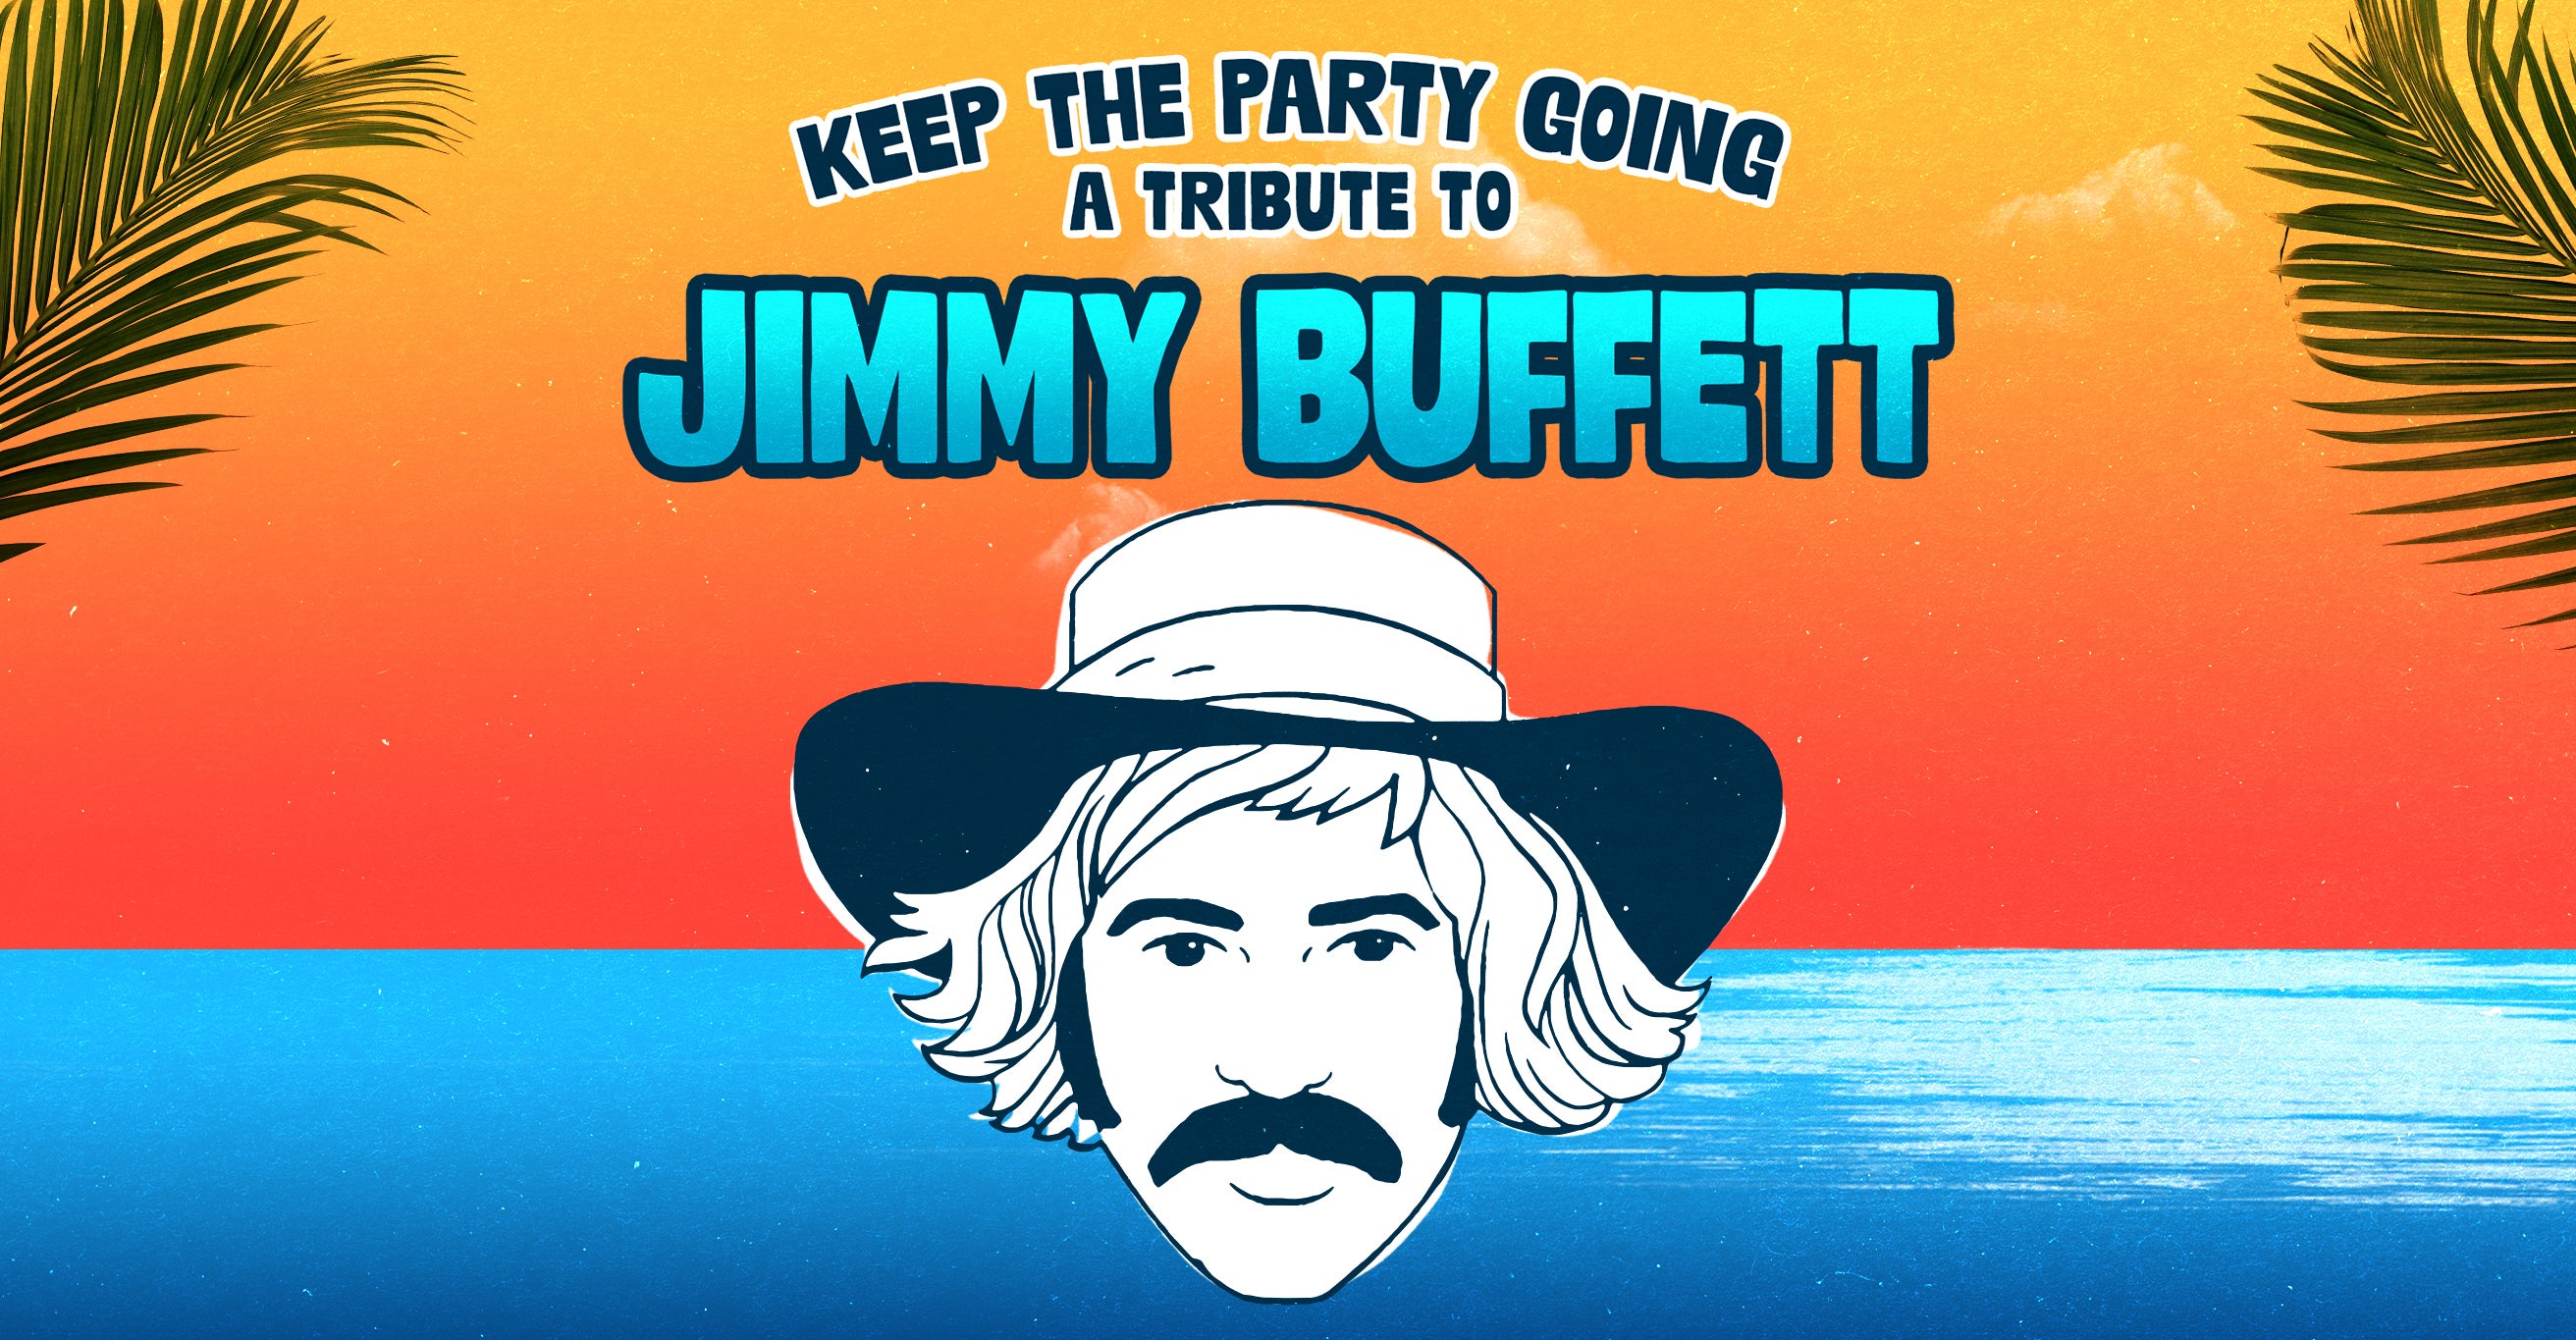 Keep the Party Going: A Tribute to Jimmy Buffett in Hollywood promo photo for Live Nation presale offer code